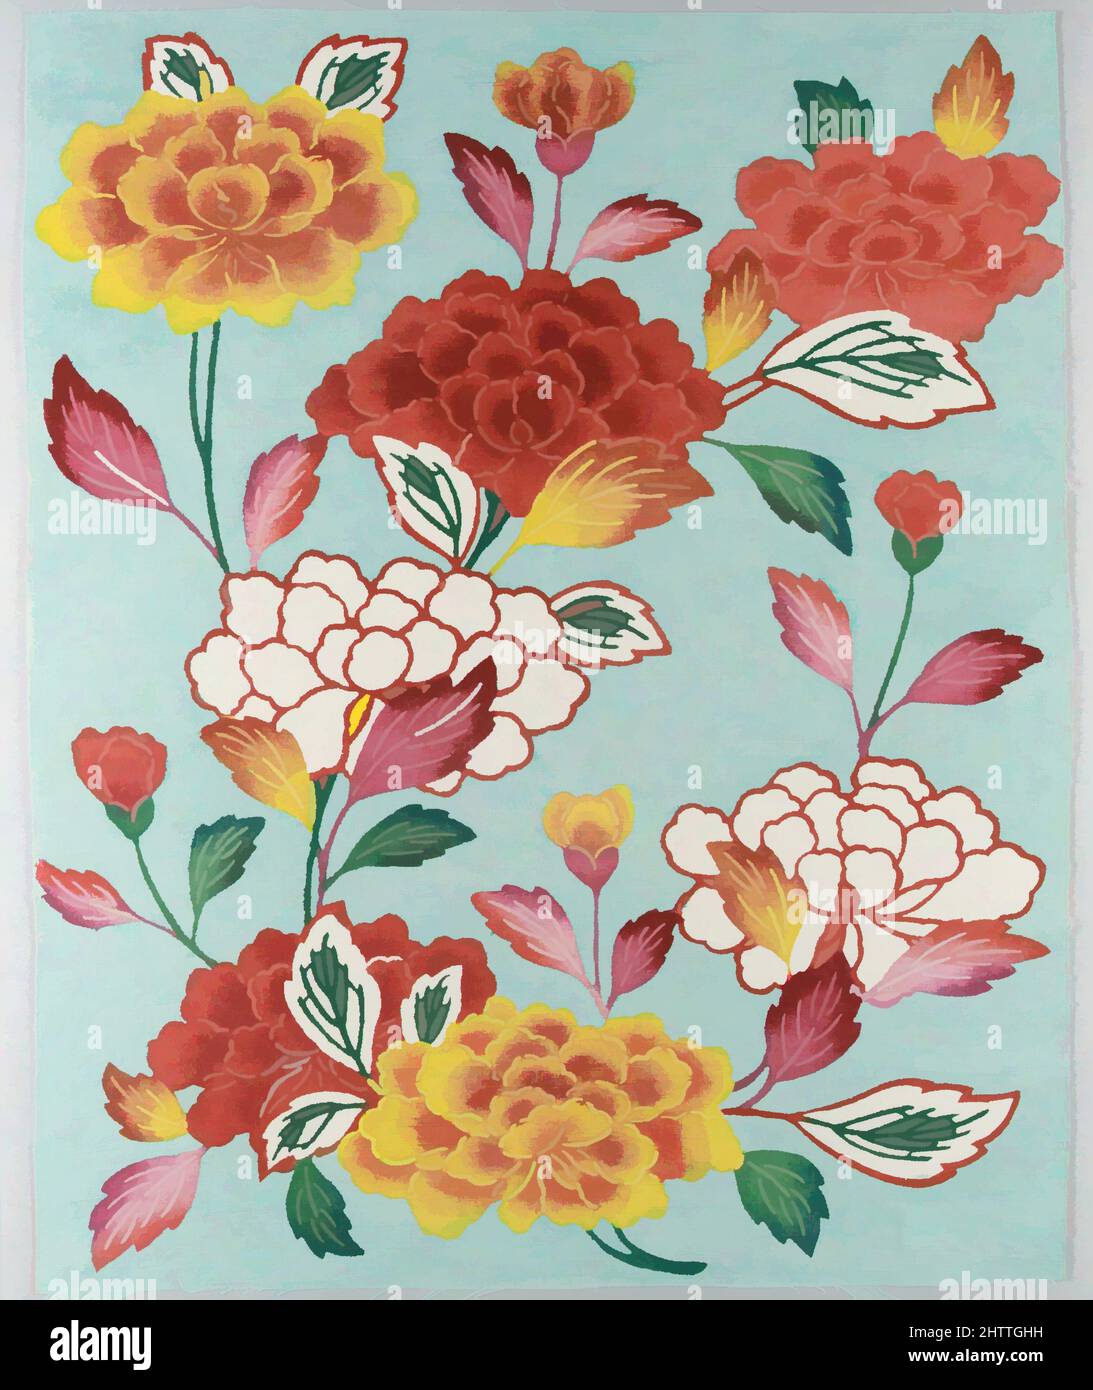 Art inspired by Bingata Panel with Tree Peonies, 20th century, Japan (Ryūkyū Islands), Cotton tabby, 18 1/4 x 15 in. (46.4 x 38.1 cm), Textiles, Classic works modernized by Artotop with a splash of modernity. Shapes, color and value, eye-catching visual impact on art. Emotions through freedom of artworks in a contemporary way. A timeless message pursuing a wildly creative new direction. Artists turning to the digital medium and creating the Artotop NFT Stock Photo